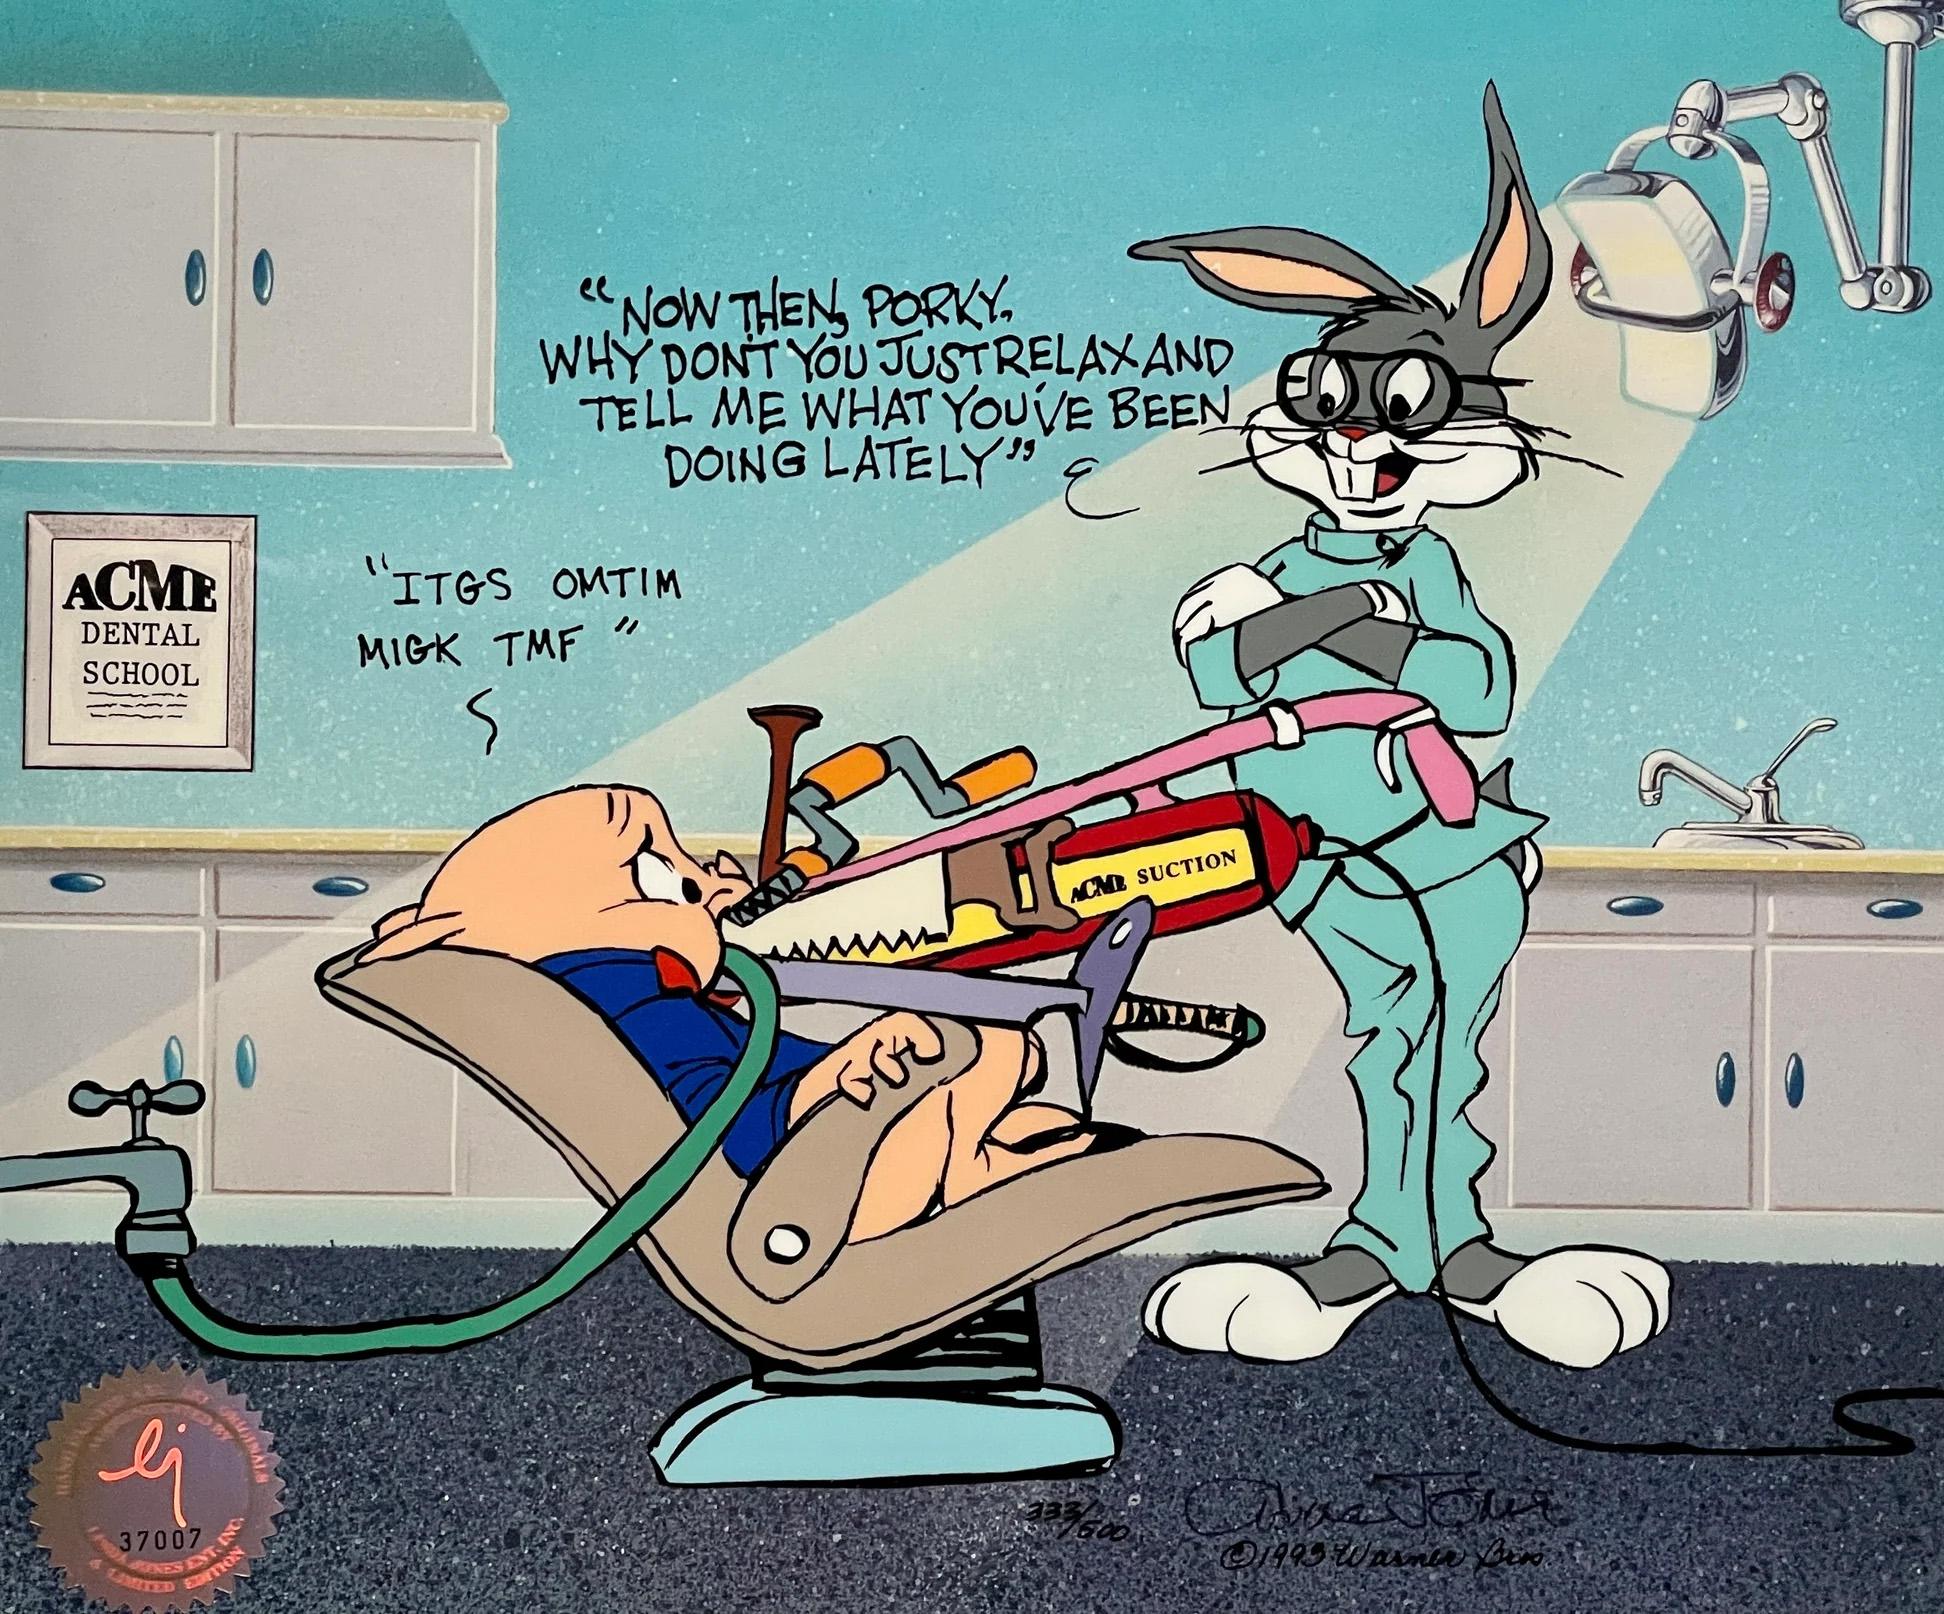 MEDIUM: Limited Edition Cel
IMAGE SIZE: 12 Field
EDITION SIZE: 500
SKU: CCV2745

Framing included in price.

ABOUT THE IMAGE: This Bugs Bunny and Porky Pig dentist-themed limited edition hand-painted cel is hand-signed by Chuck Jones and is numbered